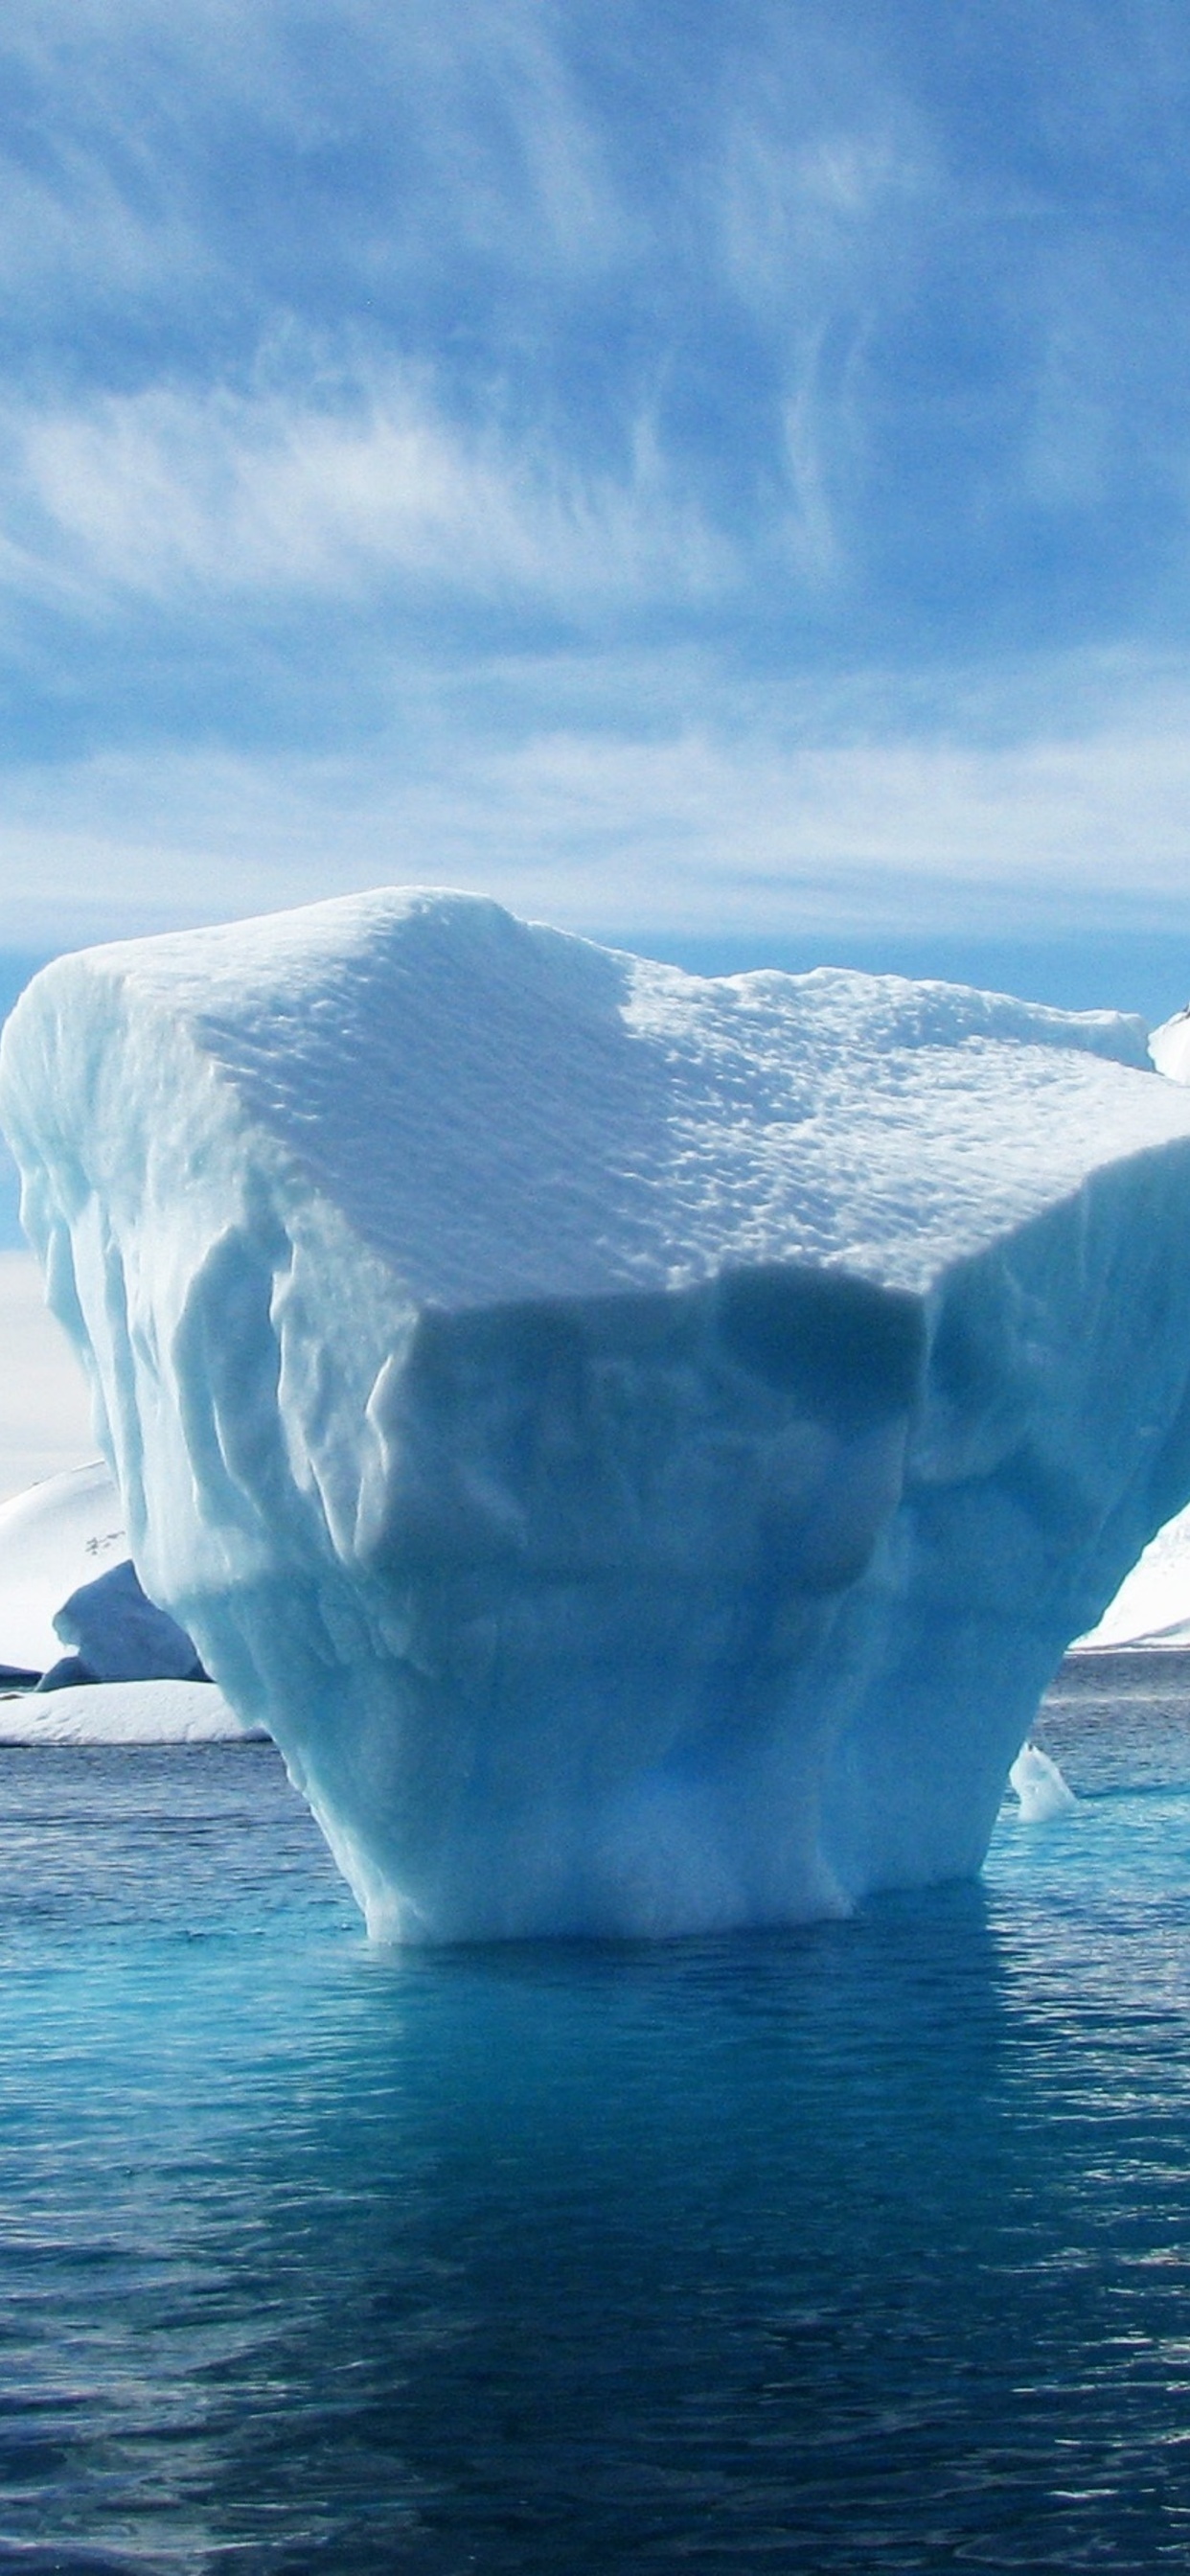 Southern Ocean, Iceberg marvels, Stunning phone wallpapers, Nature's beauty, 1250x2690 HD Phone